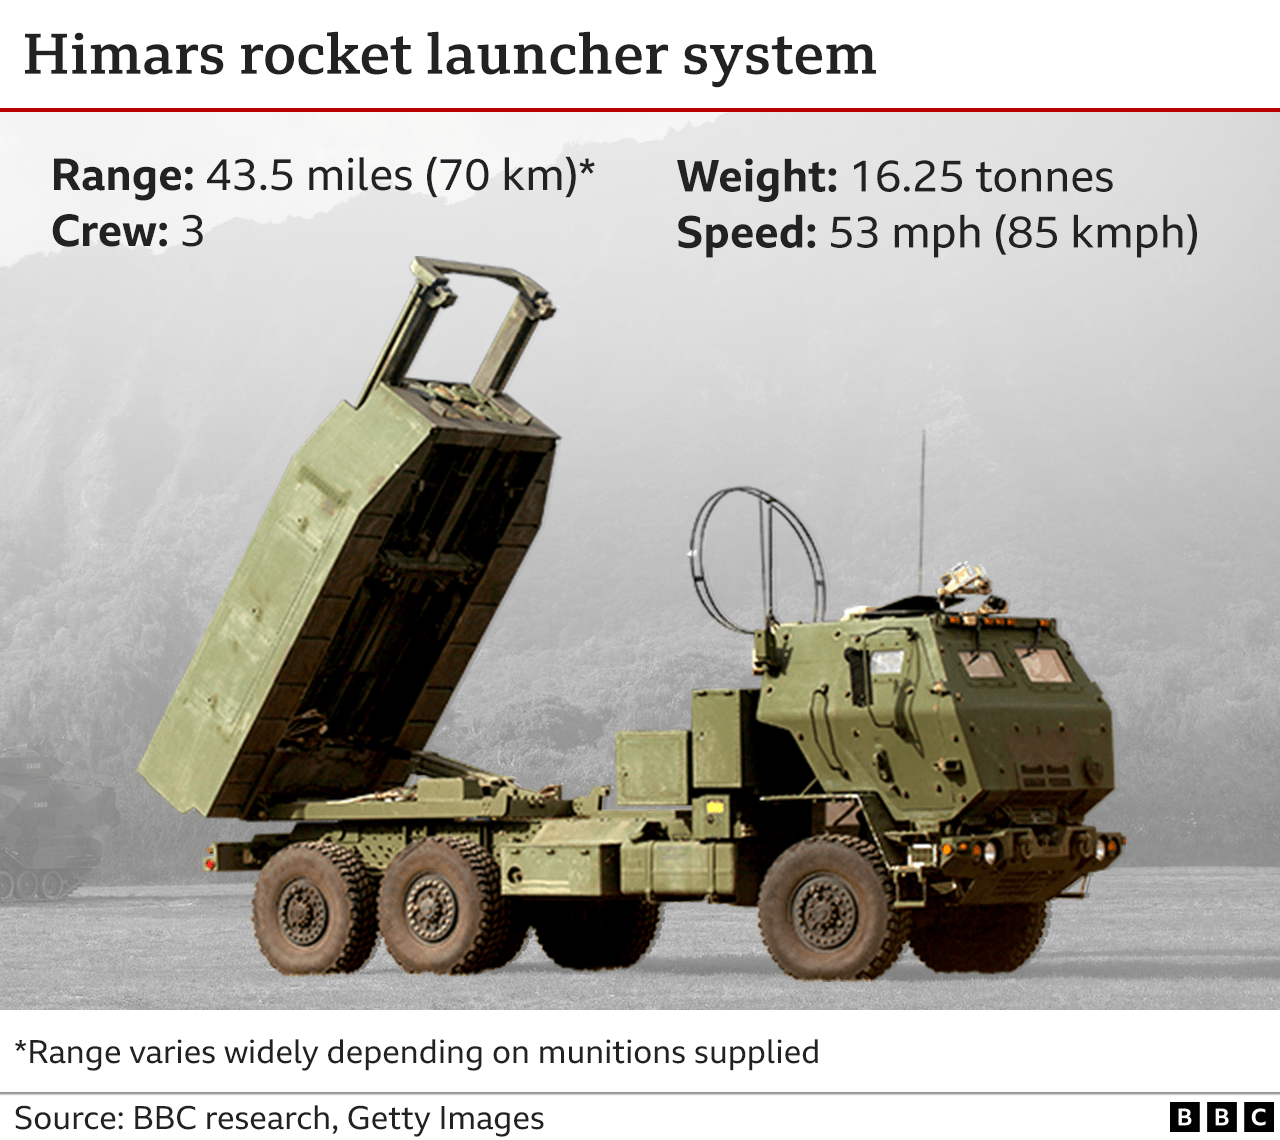 Image shows graphic of Himars launcher system